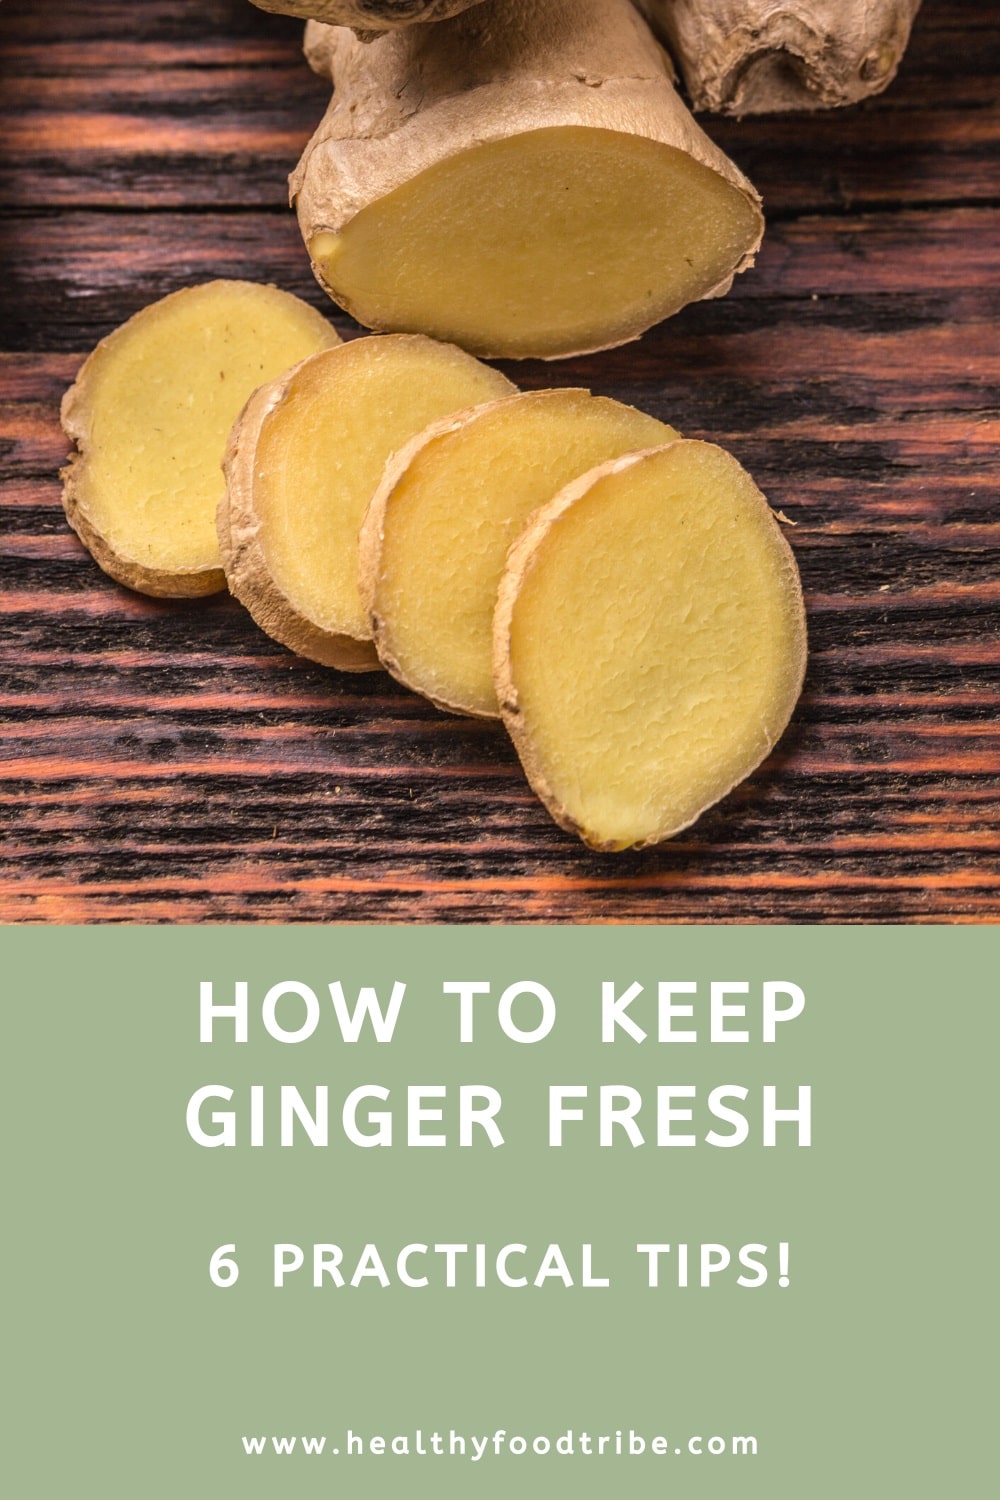 How to keep ginger fresh (6 storage tips)